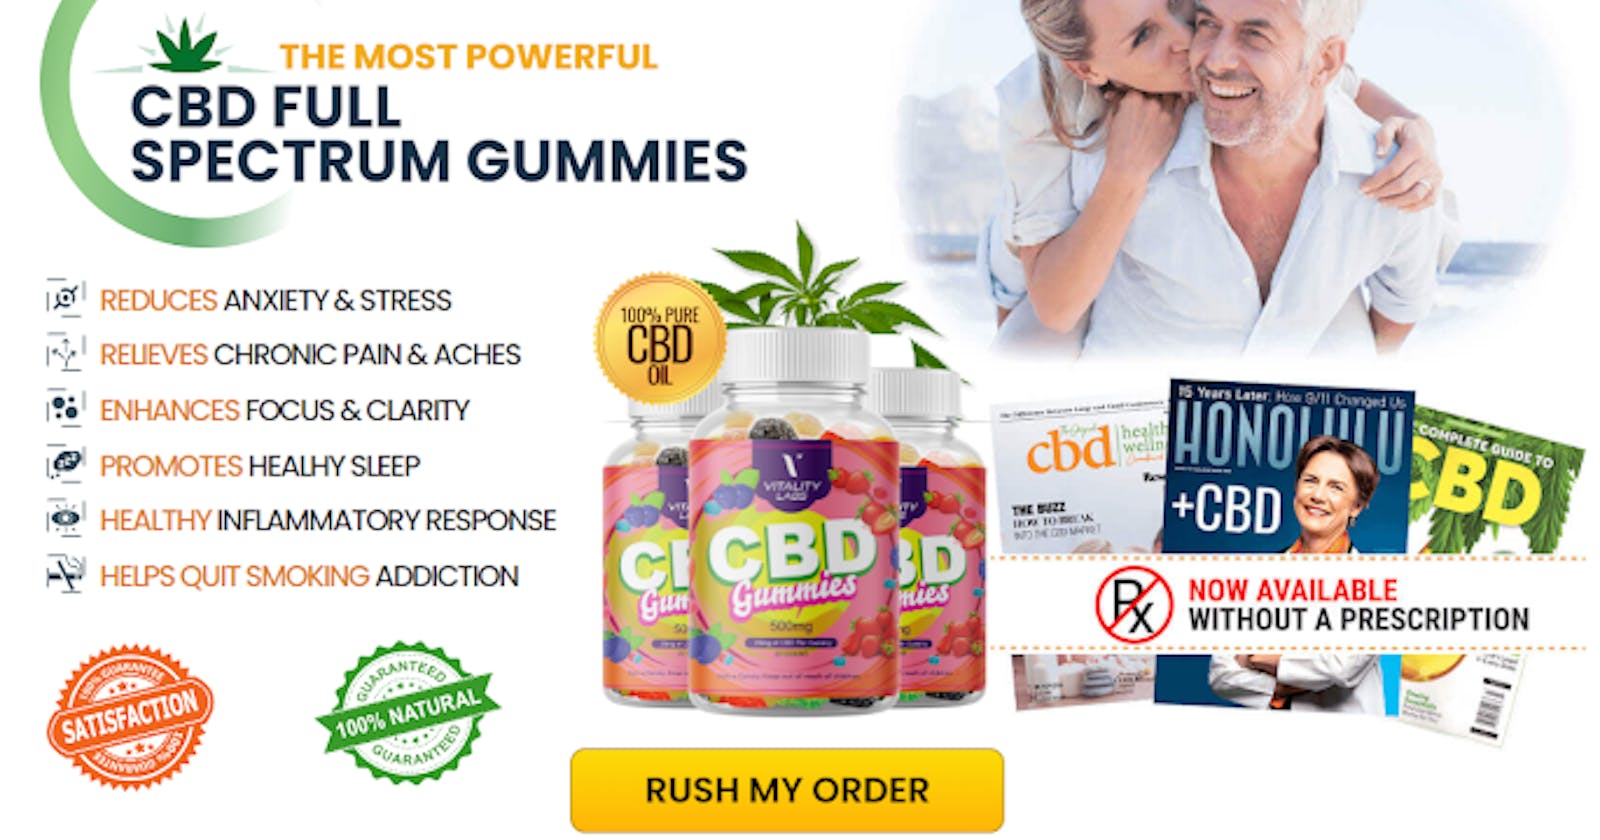 Vital Labs CBD Gummies ReviewsDangerousNegative SIDE EFFECTS, BENEFITS, AND PRICE FOR SALE!?